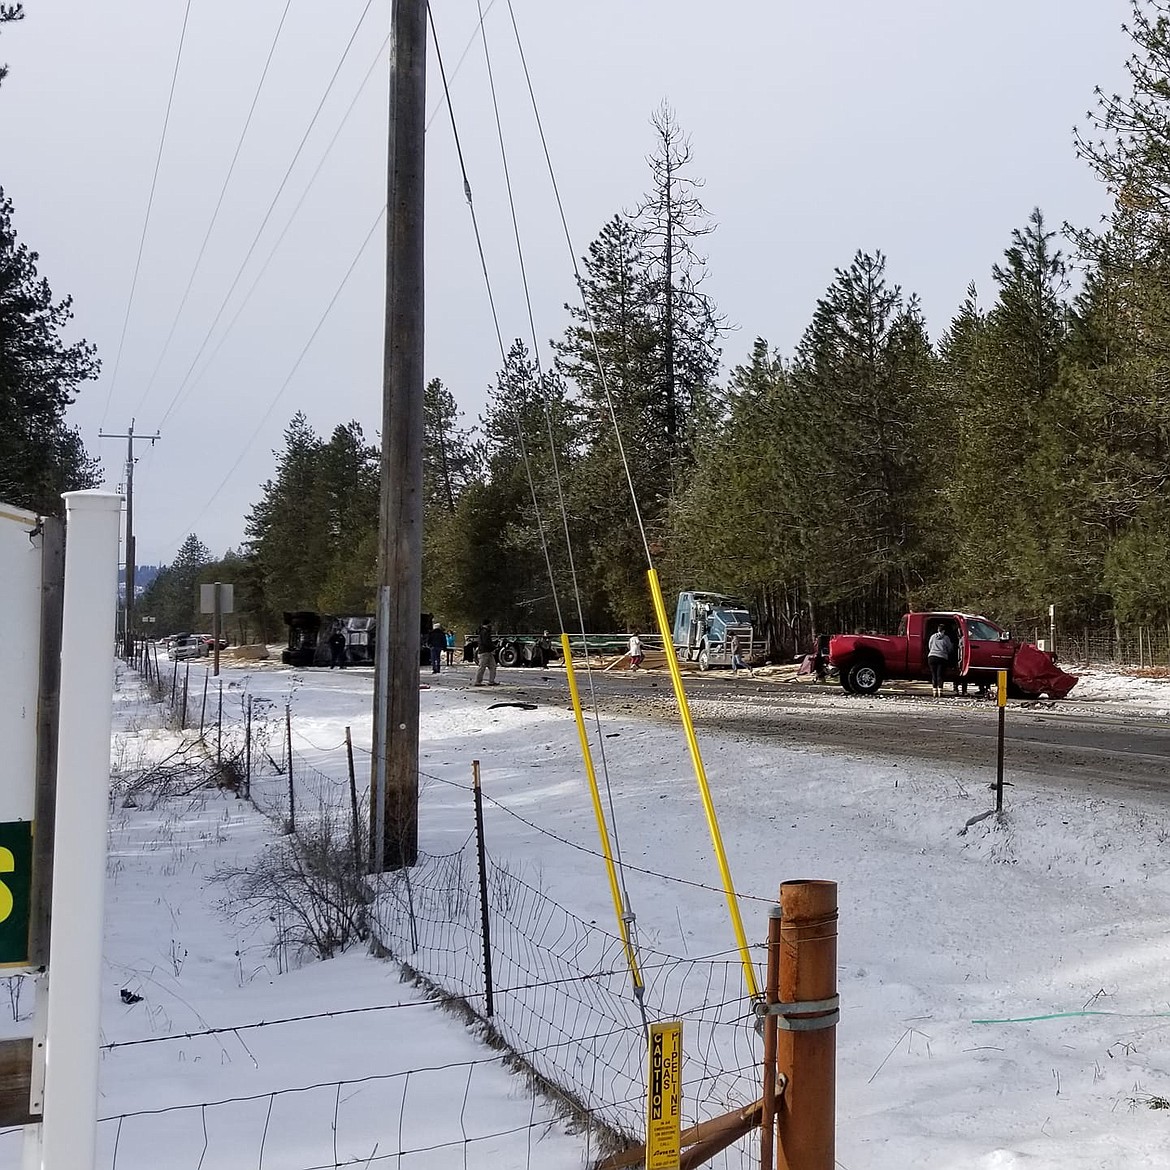 Residents who live near the intersection of Highway 53 and Atlas Road in Rathdrum say car accidents are a regular occurrence. The accident pictured in this photo happened Feb. 3, 2019.